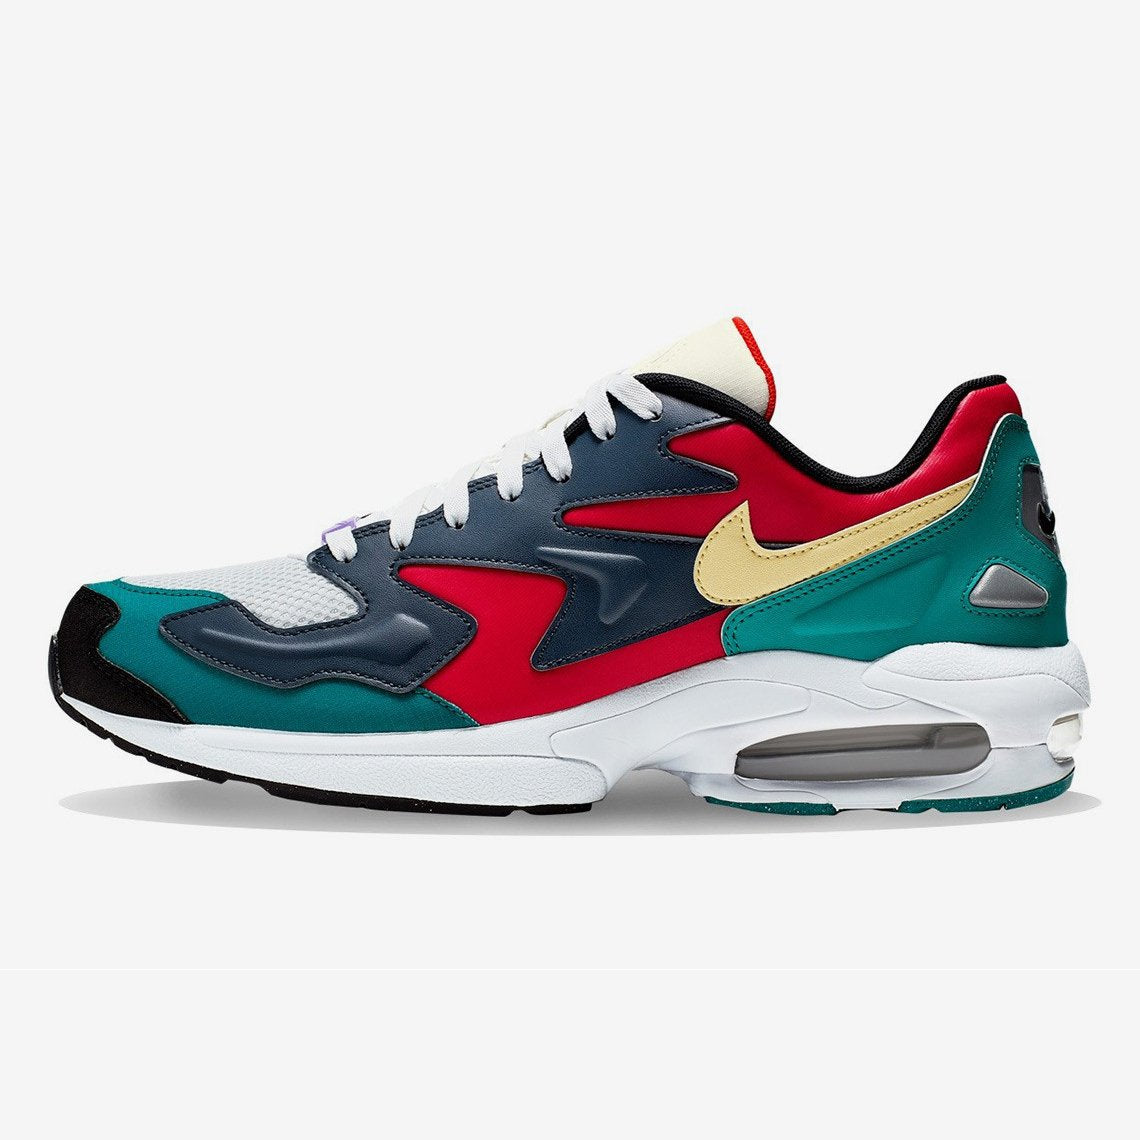 Nike Air Max 2 Light SP Habanero Red Navy Emerald Release Date